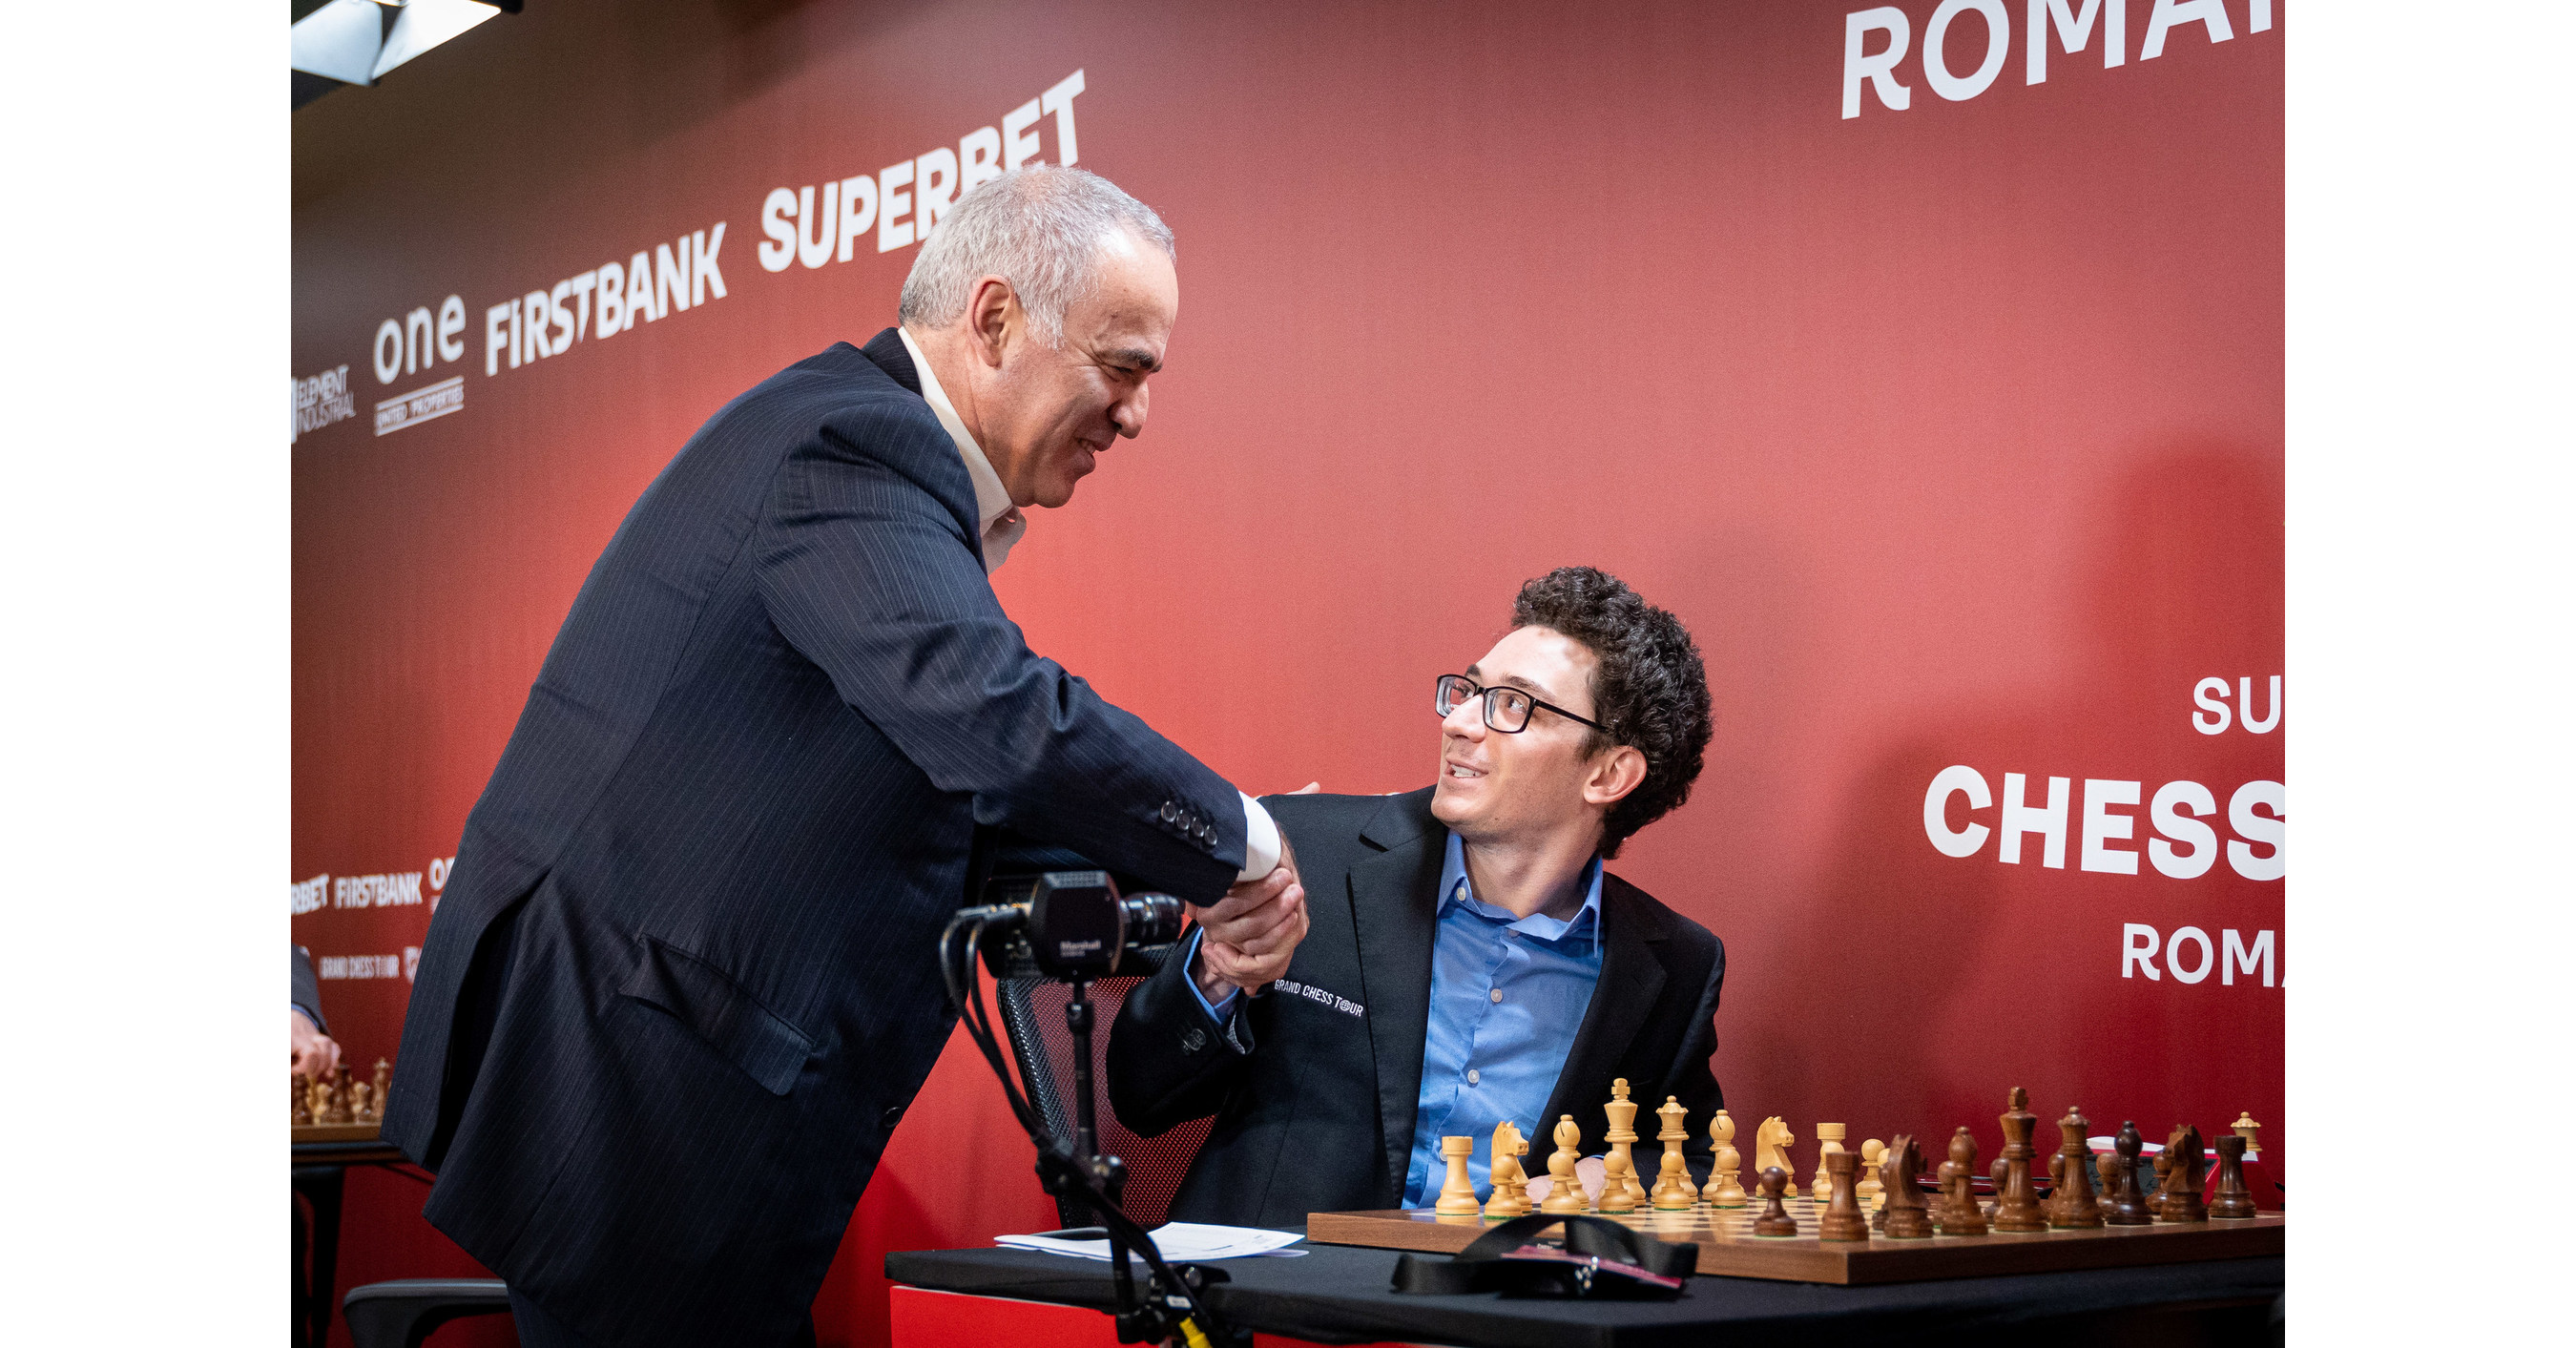 2022 Grand Chess Tour Returns With $1.4 Million Prize Fund Across Five  Tournaments In Europe and the United States